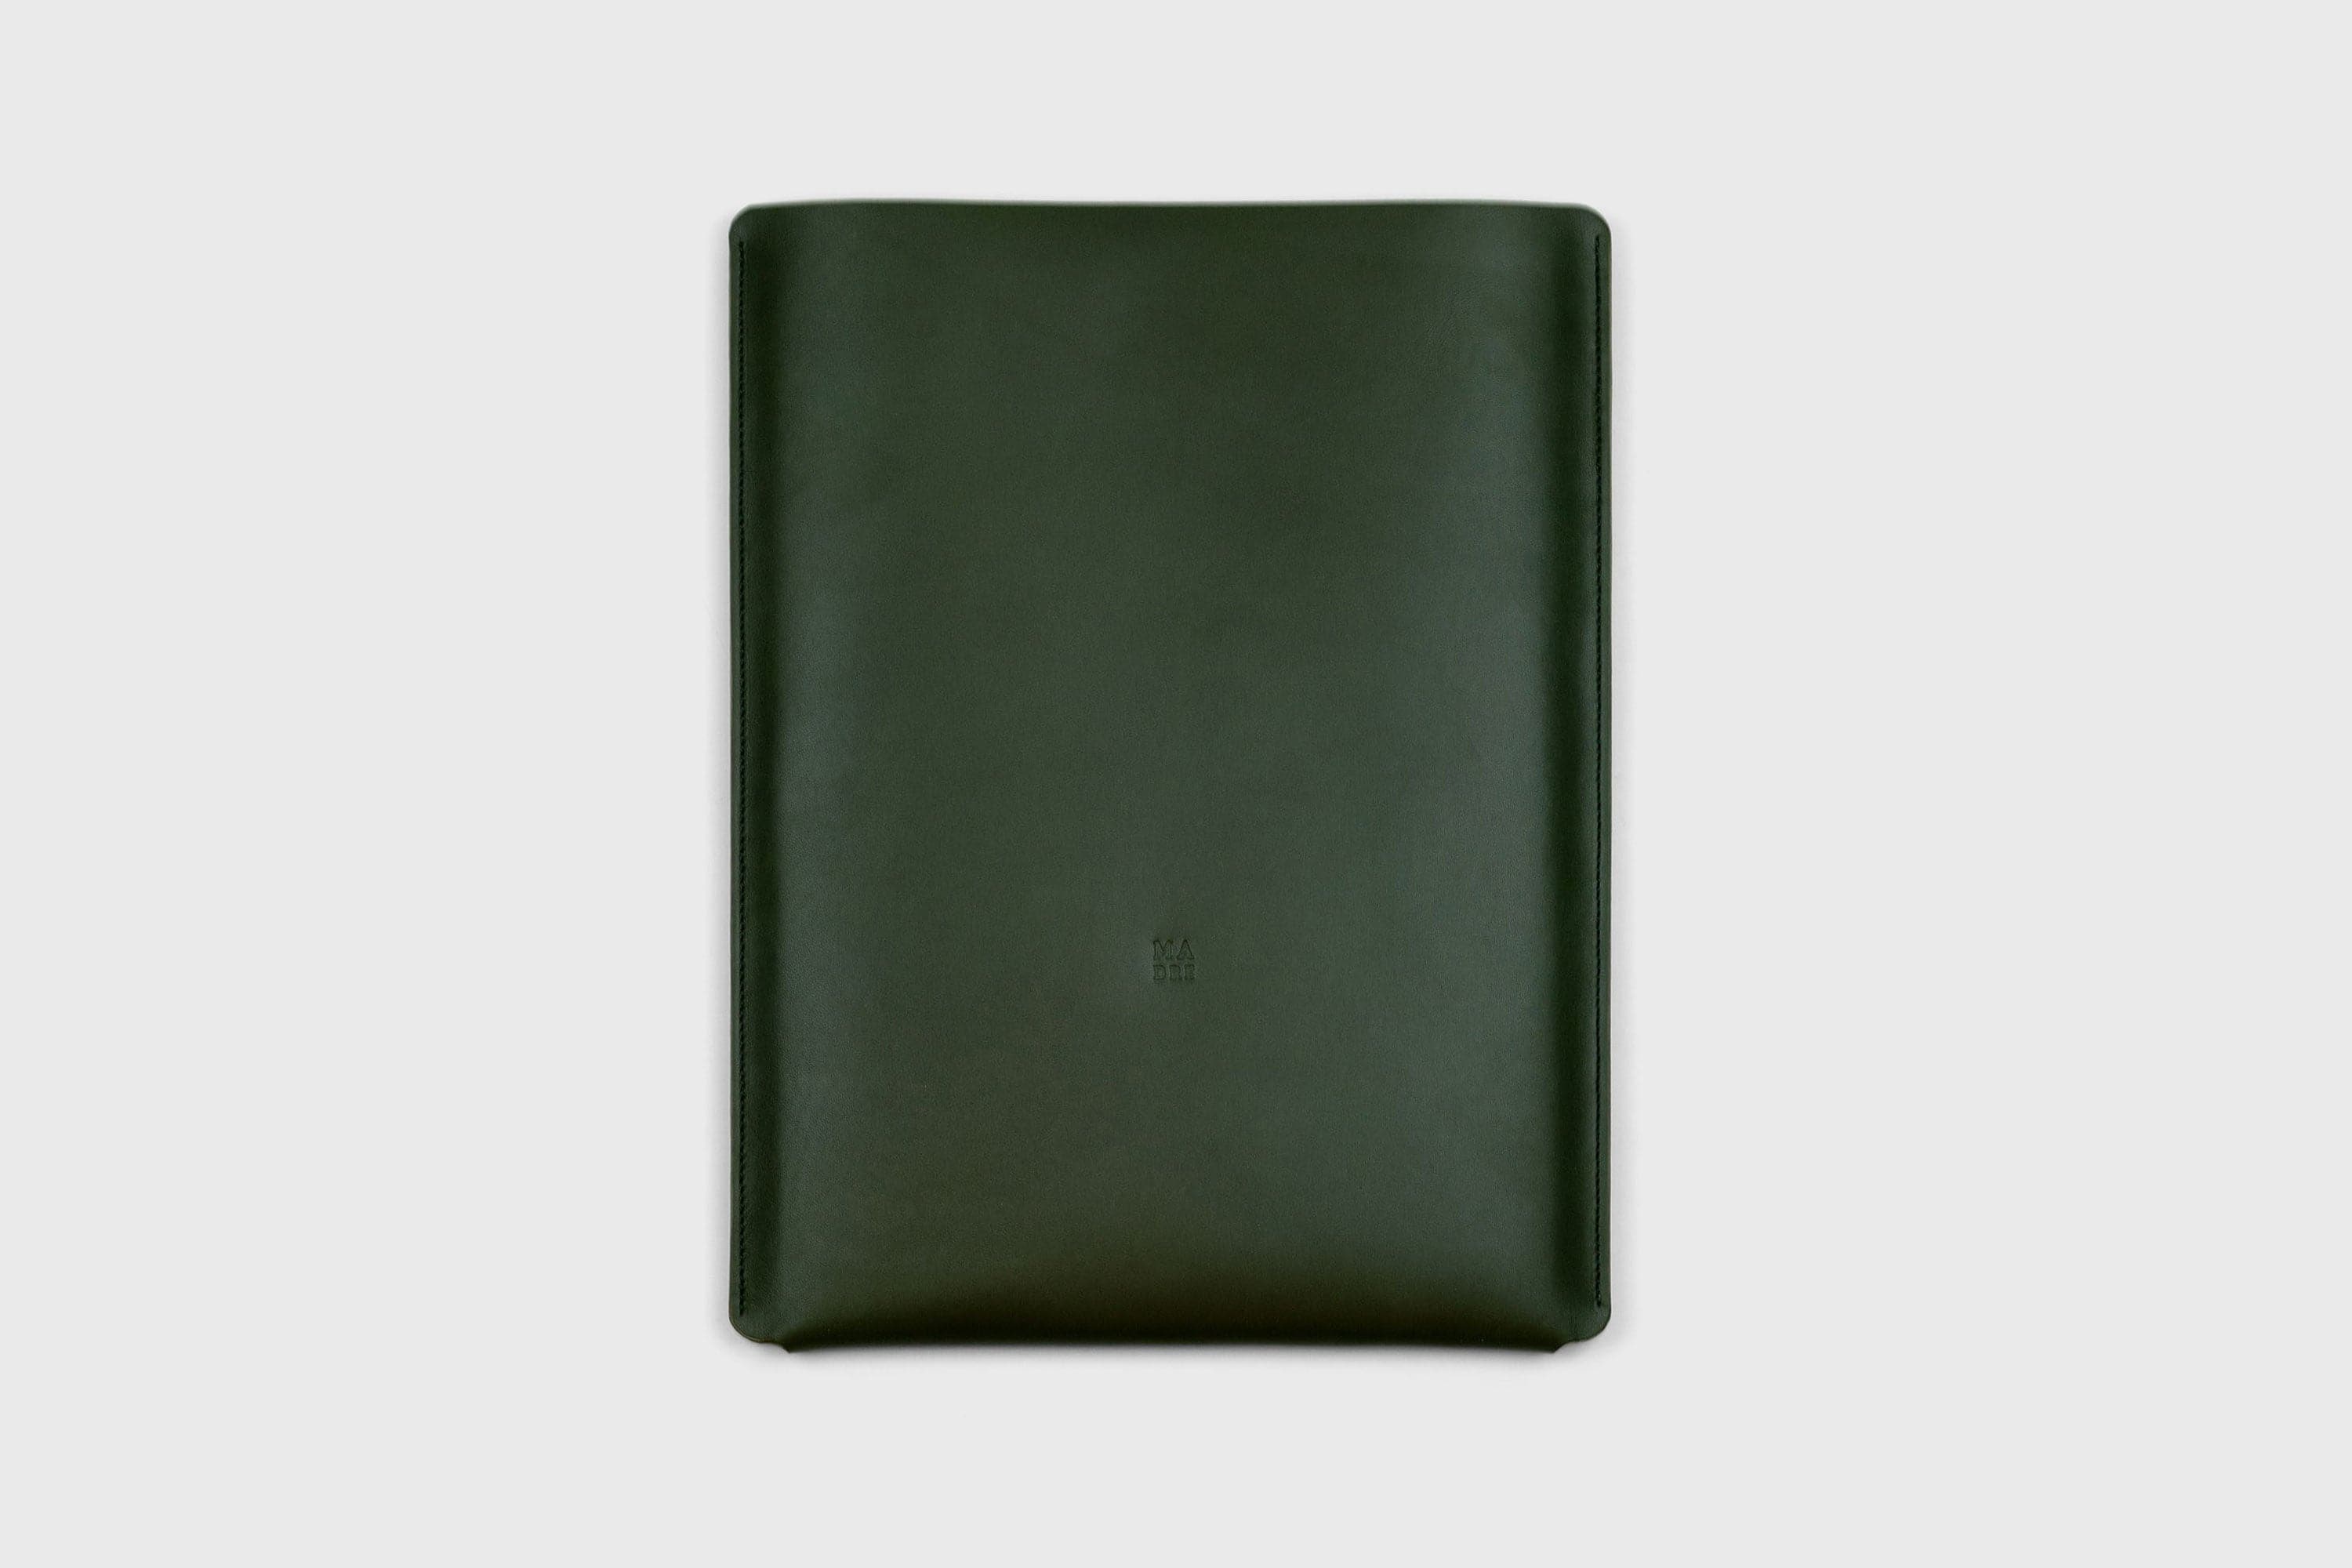 MacBook Pro And Air 13 Inch Leather Sleeve Dark Olive Green Color Minimalistic Vegetable Tanned Leather Design Manuel Dreesmann Atelier Madre Barcelona Spain